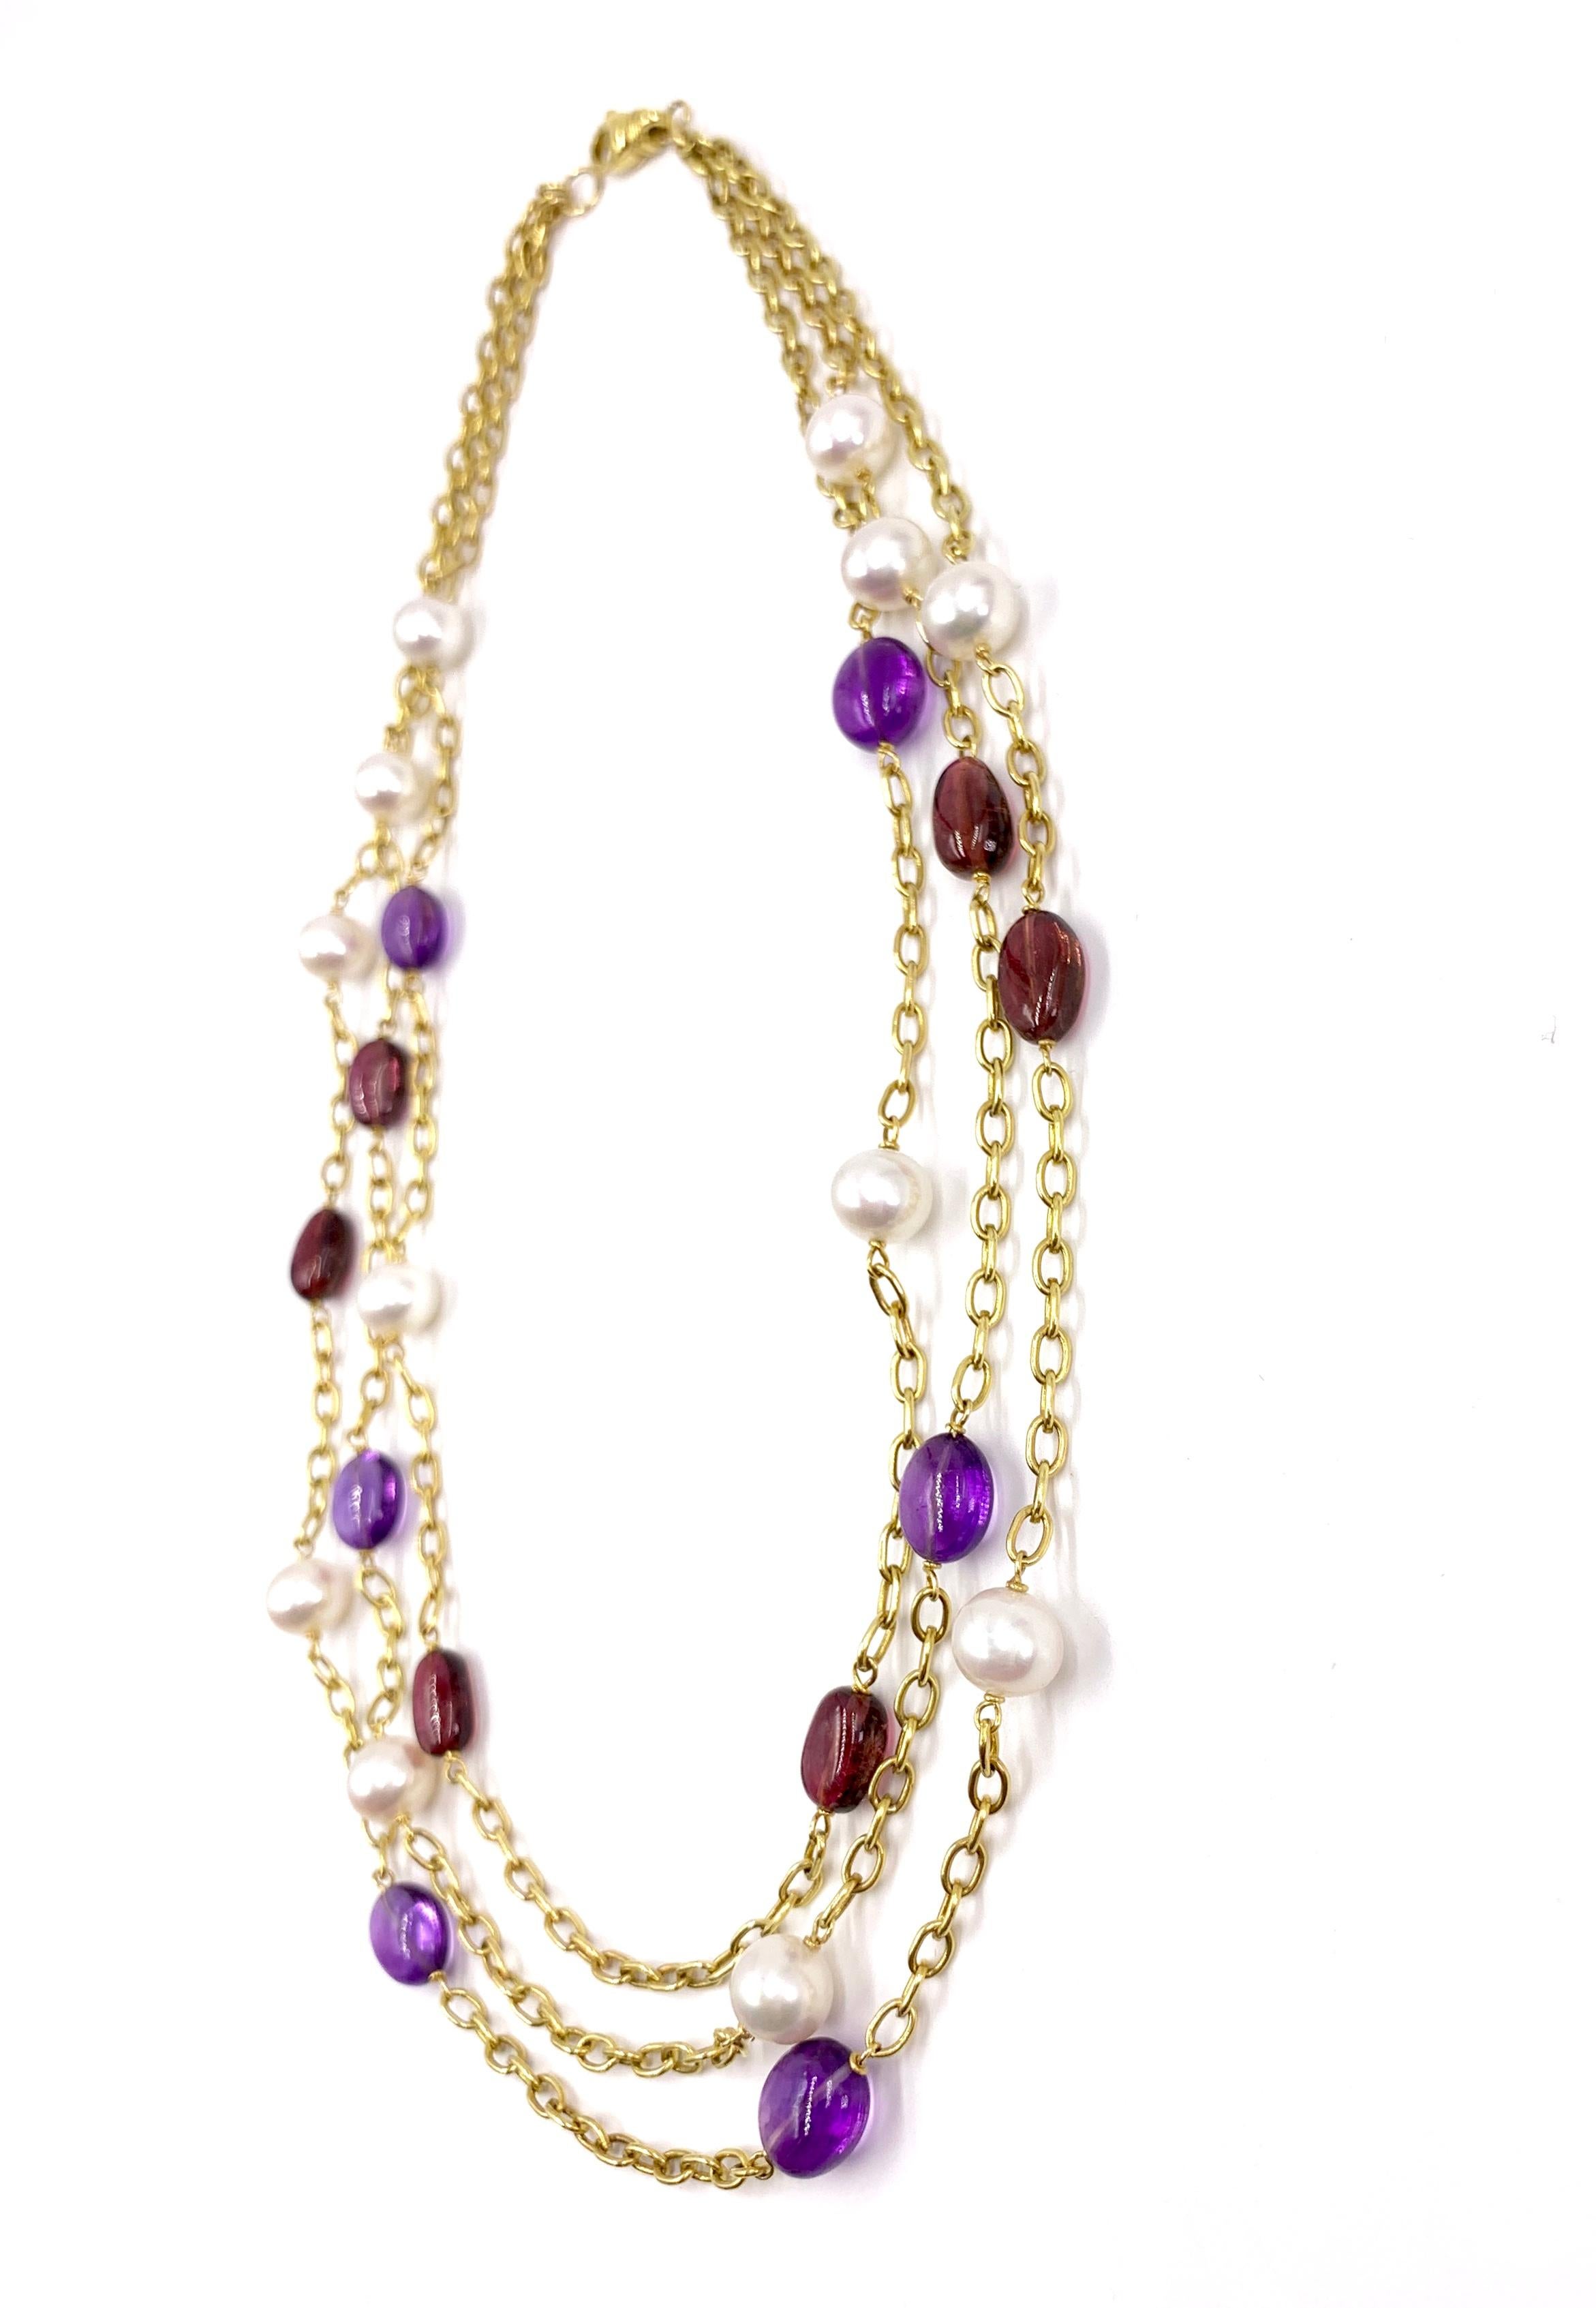 18 Karat Gold Three-Strand Pearl, Amethyst and Tourmaline Necklace In Excellent Condition For Sale In Pikesville, MD